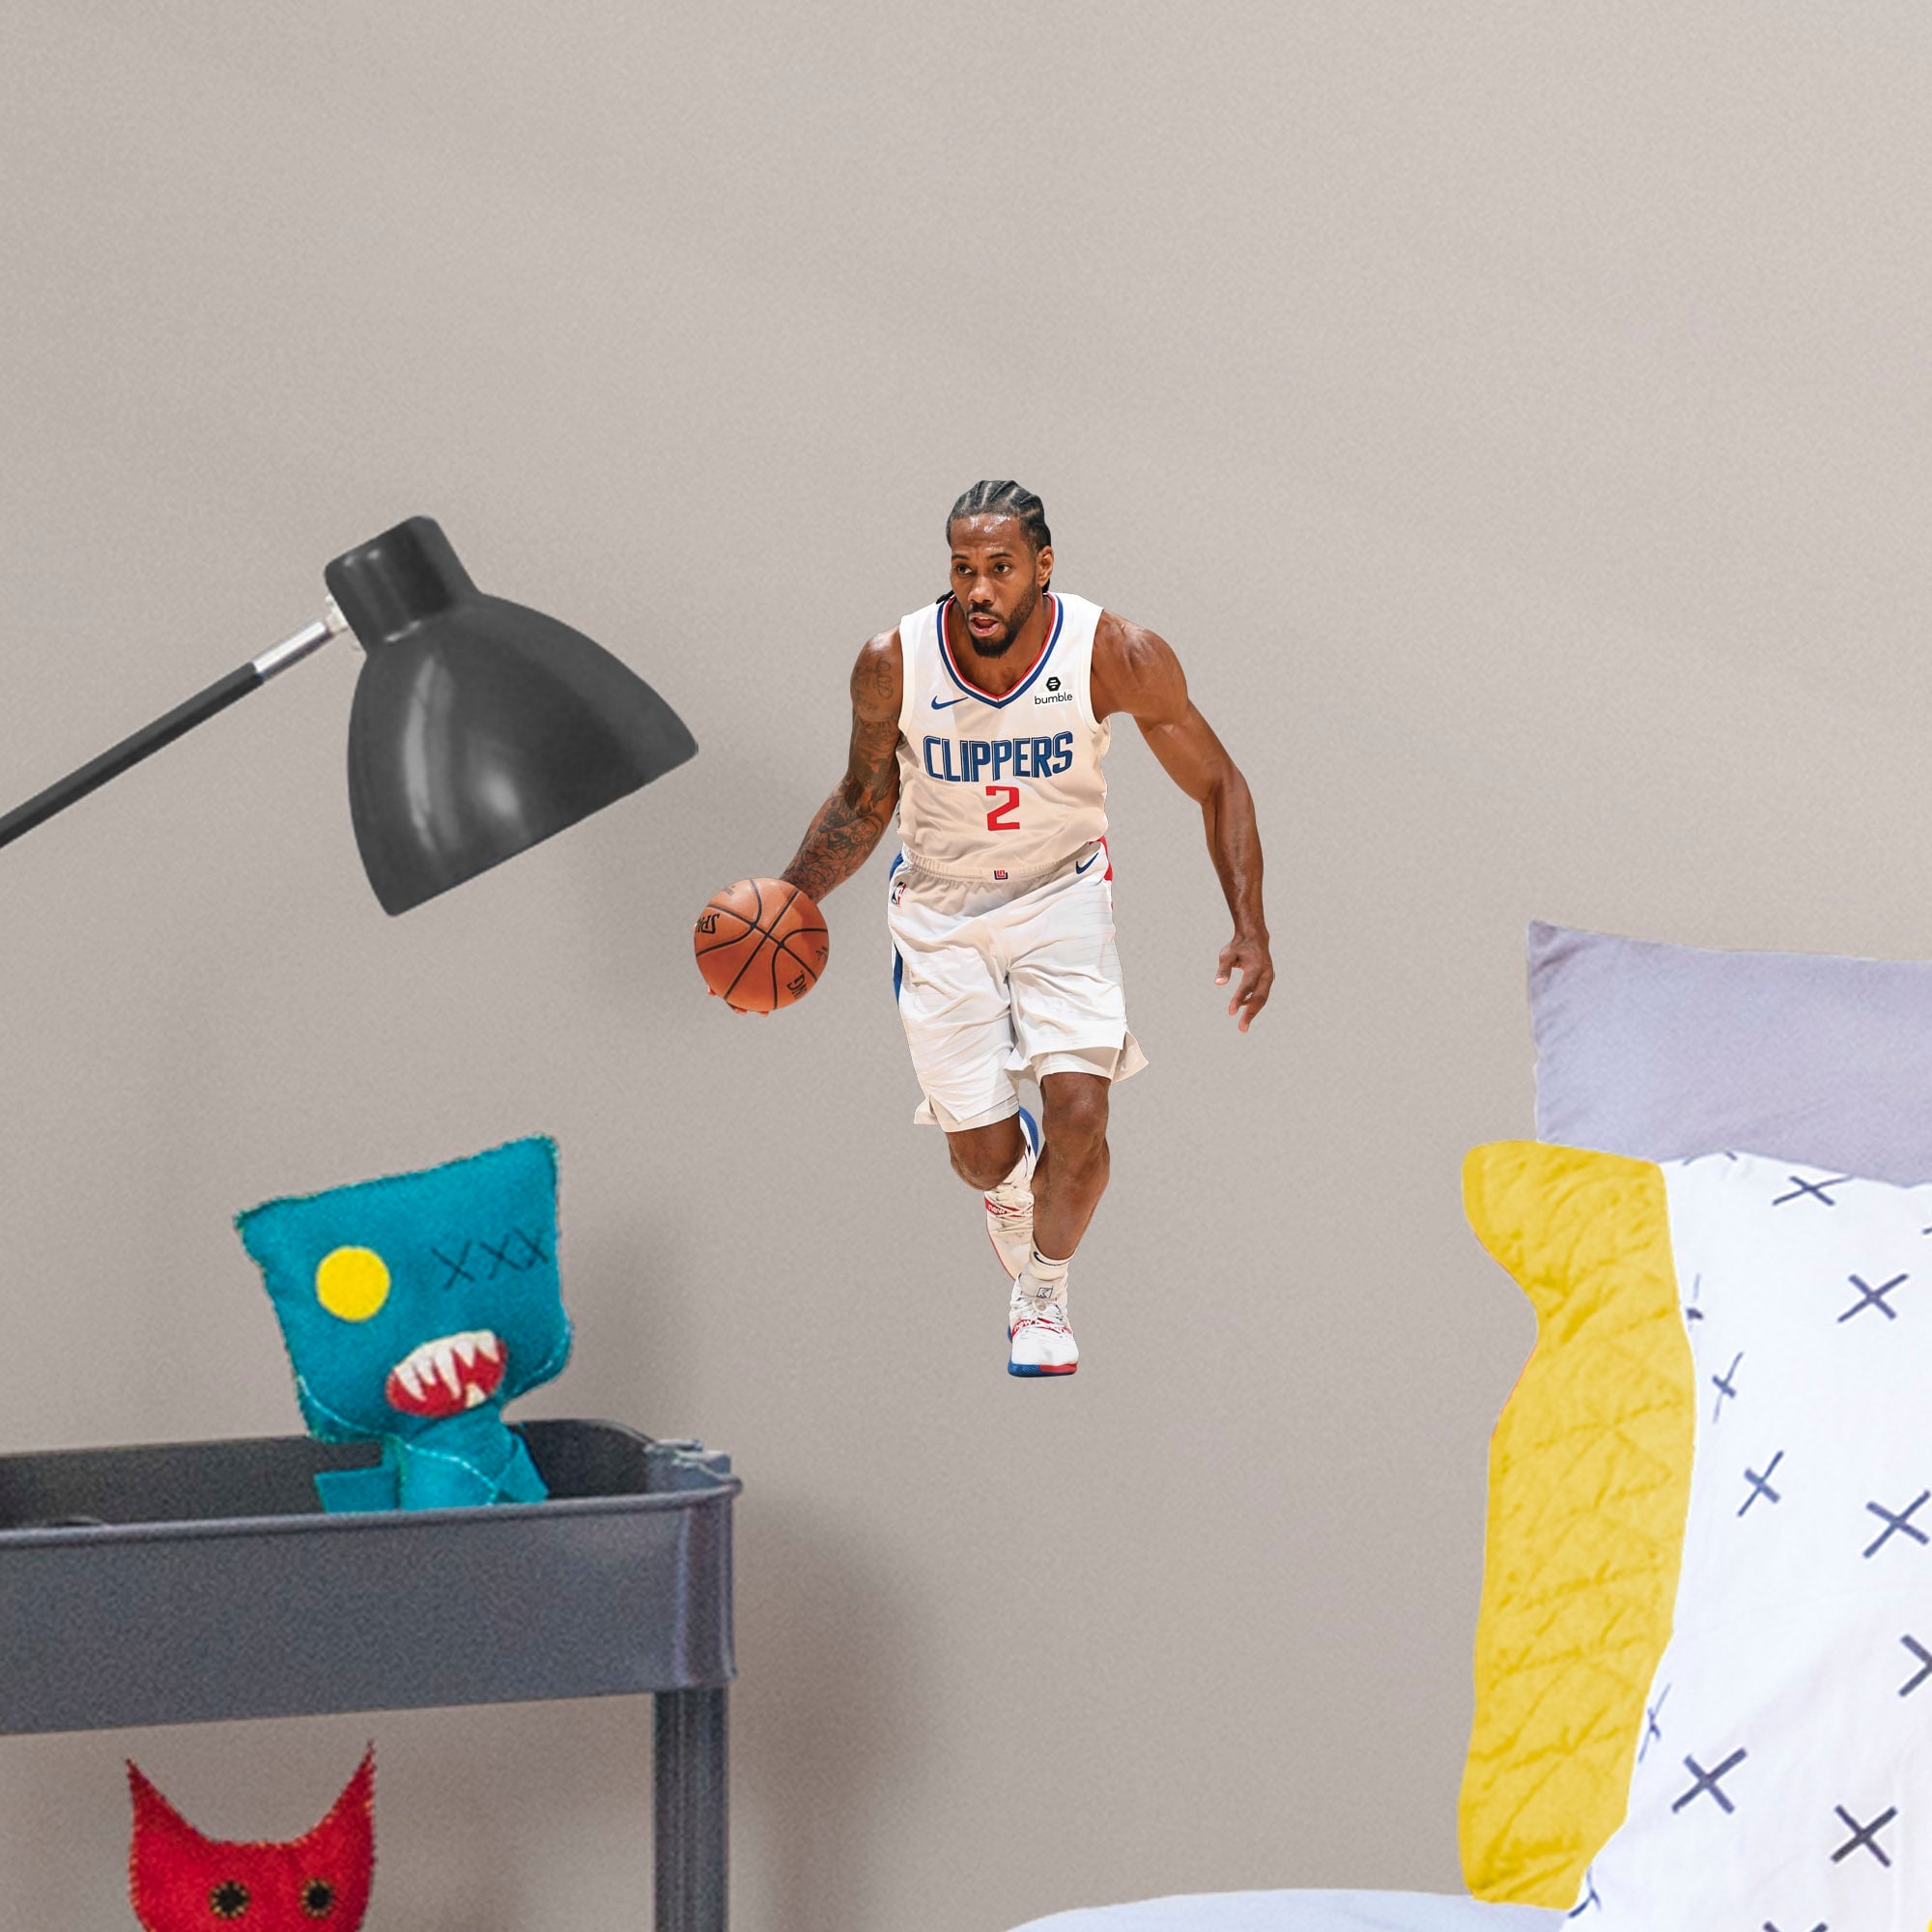 Kawhi Leonard for Los Angeles Clippers - Officially Licensed NBA Removable Wall Decal Large by Fathead | Vinyl